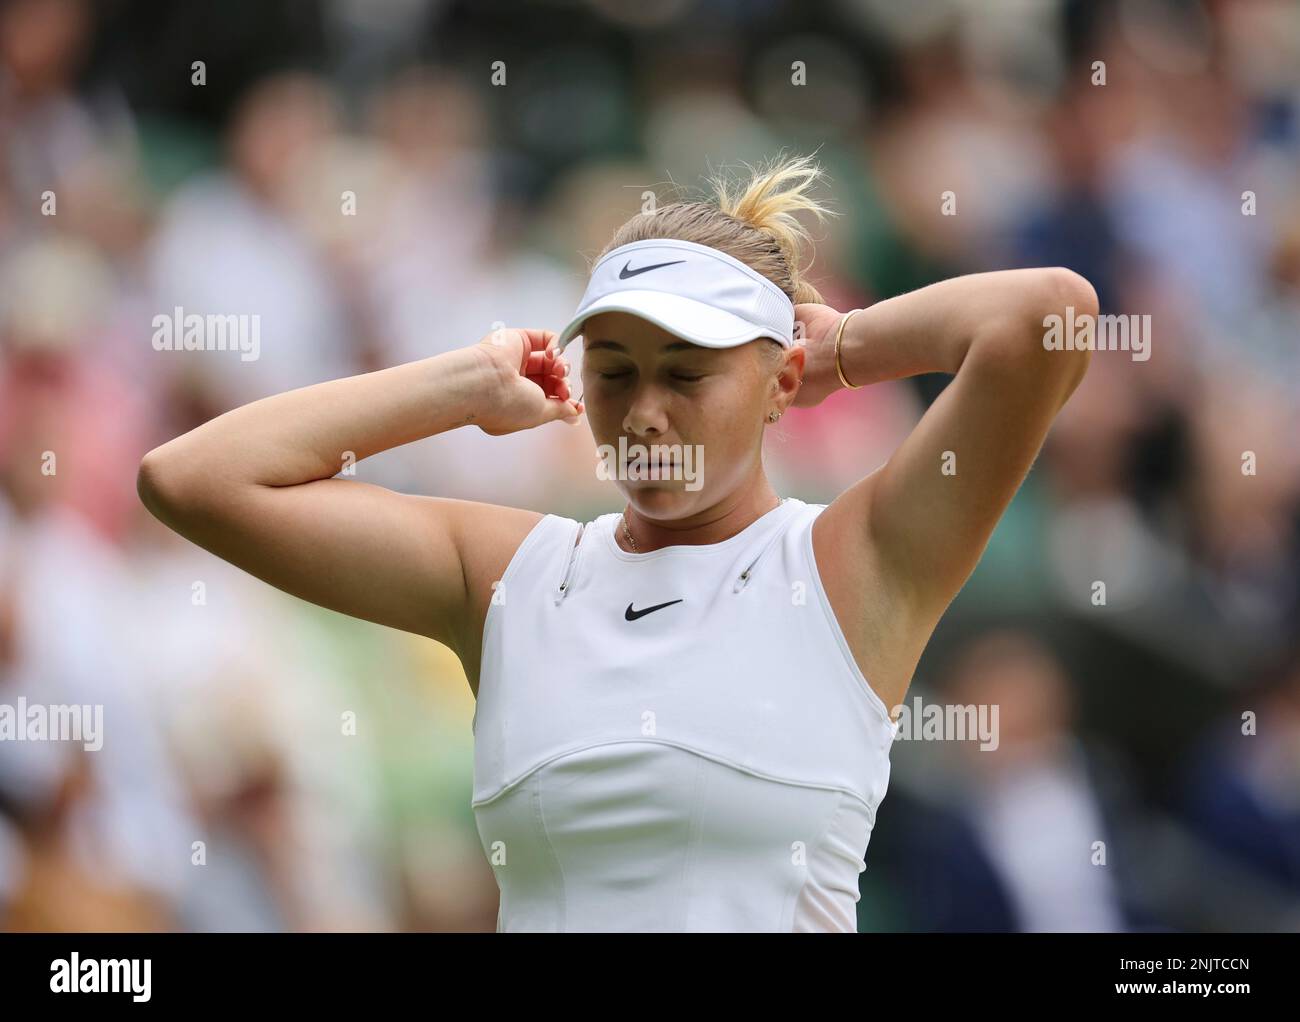 Amanda Anisimova of United States of America fixes her hair during the game of the ladies singles quarter-finals match against Simona Halep of Romania in the Championships, Wimbledon at All England Lawn